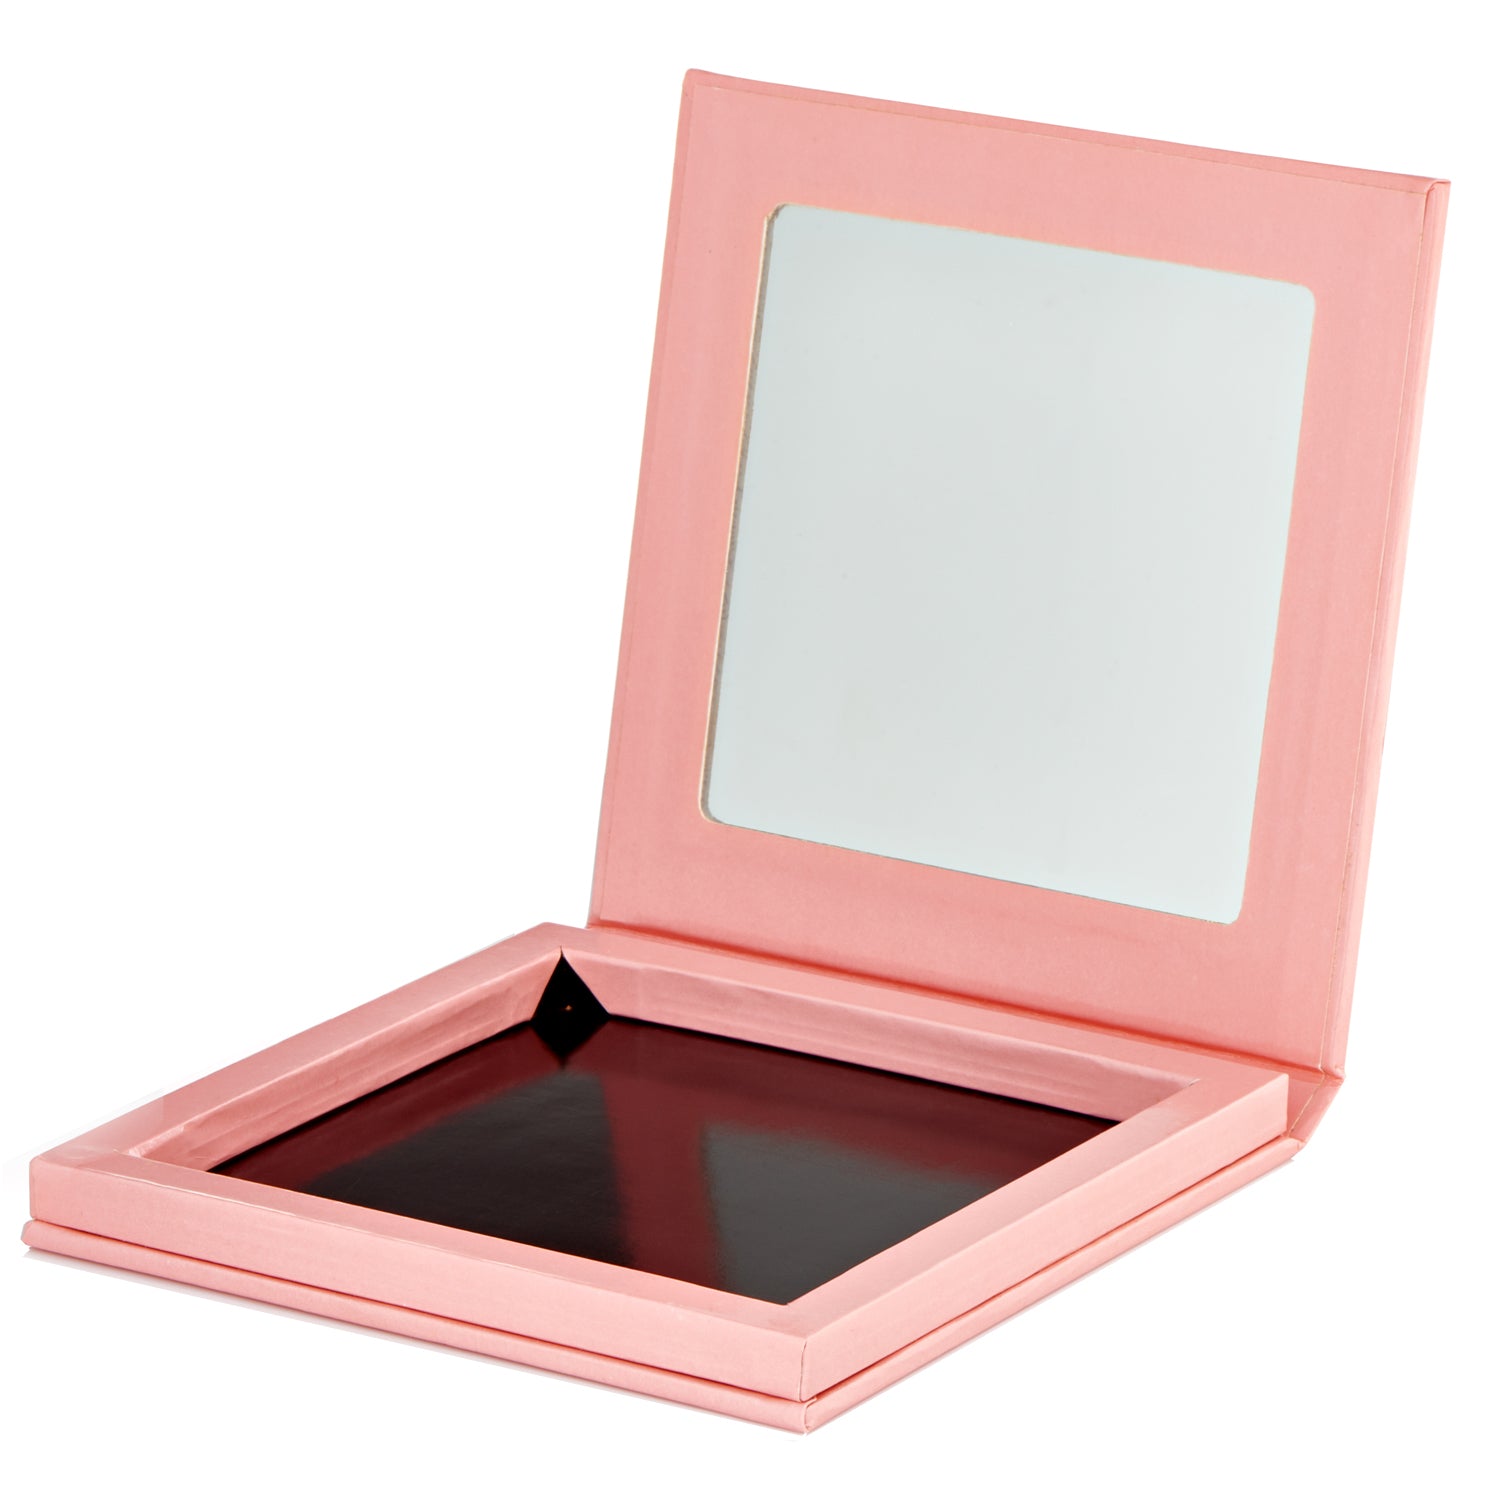 FIXY Small Empty Magnetic Makeup Palette w/ Mirror - 5 PACK – FIXY Makeup